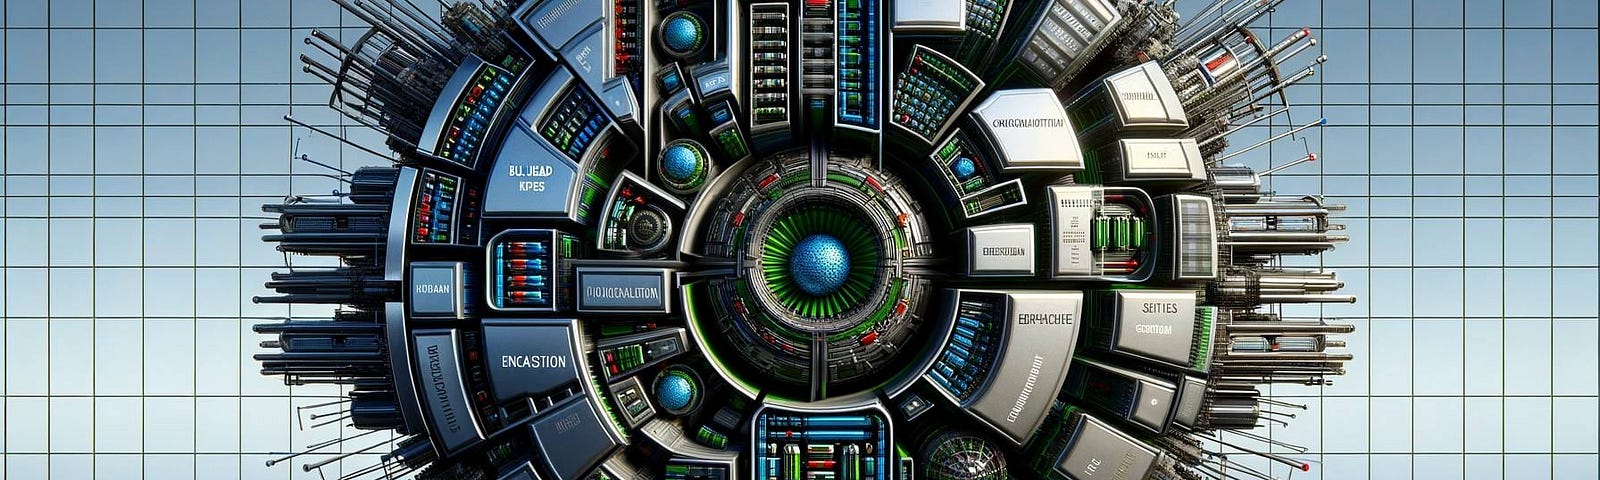 An abstract depiction of the Bulkhead Pattern in system design, showcasing compartmentalized sections within a larger structure. These ‘bulkheads’ symbolize the isolation of system parts to prevent failure spread, each containing its own mini-systems. The design emphasizes strength and resilience, with robust barriers in a mix of industrial colors like steel blue, gray, and vibrant green or red accents, against a high-tech background.